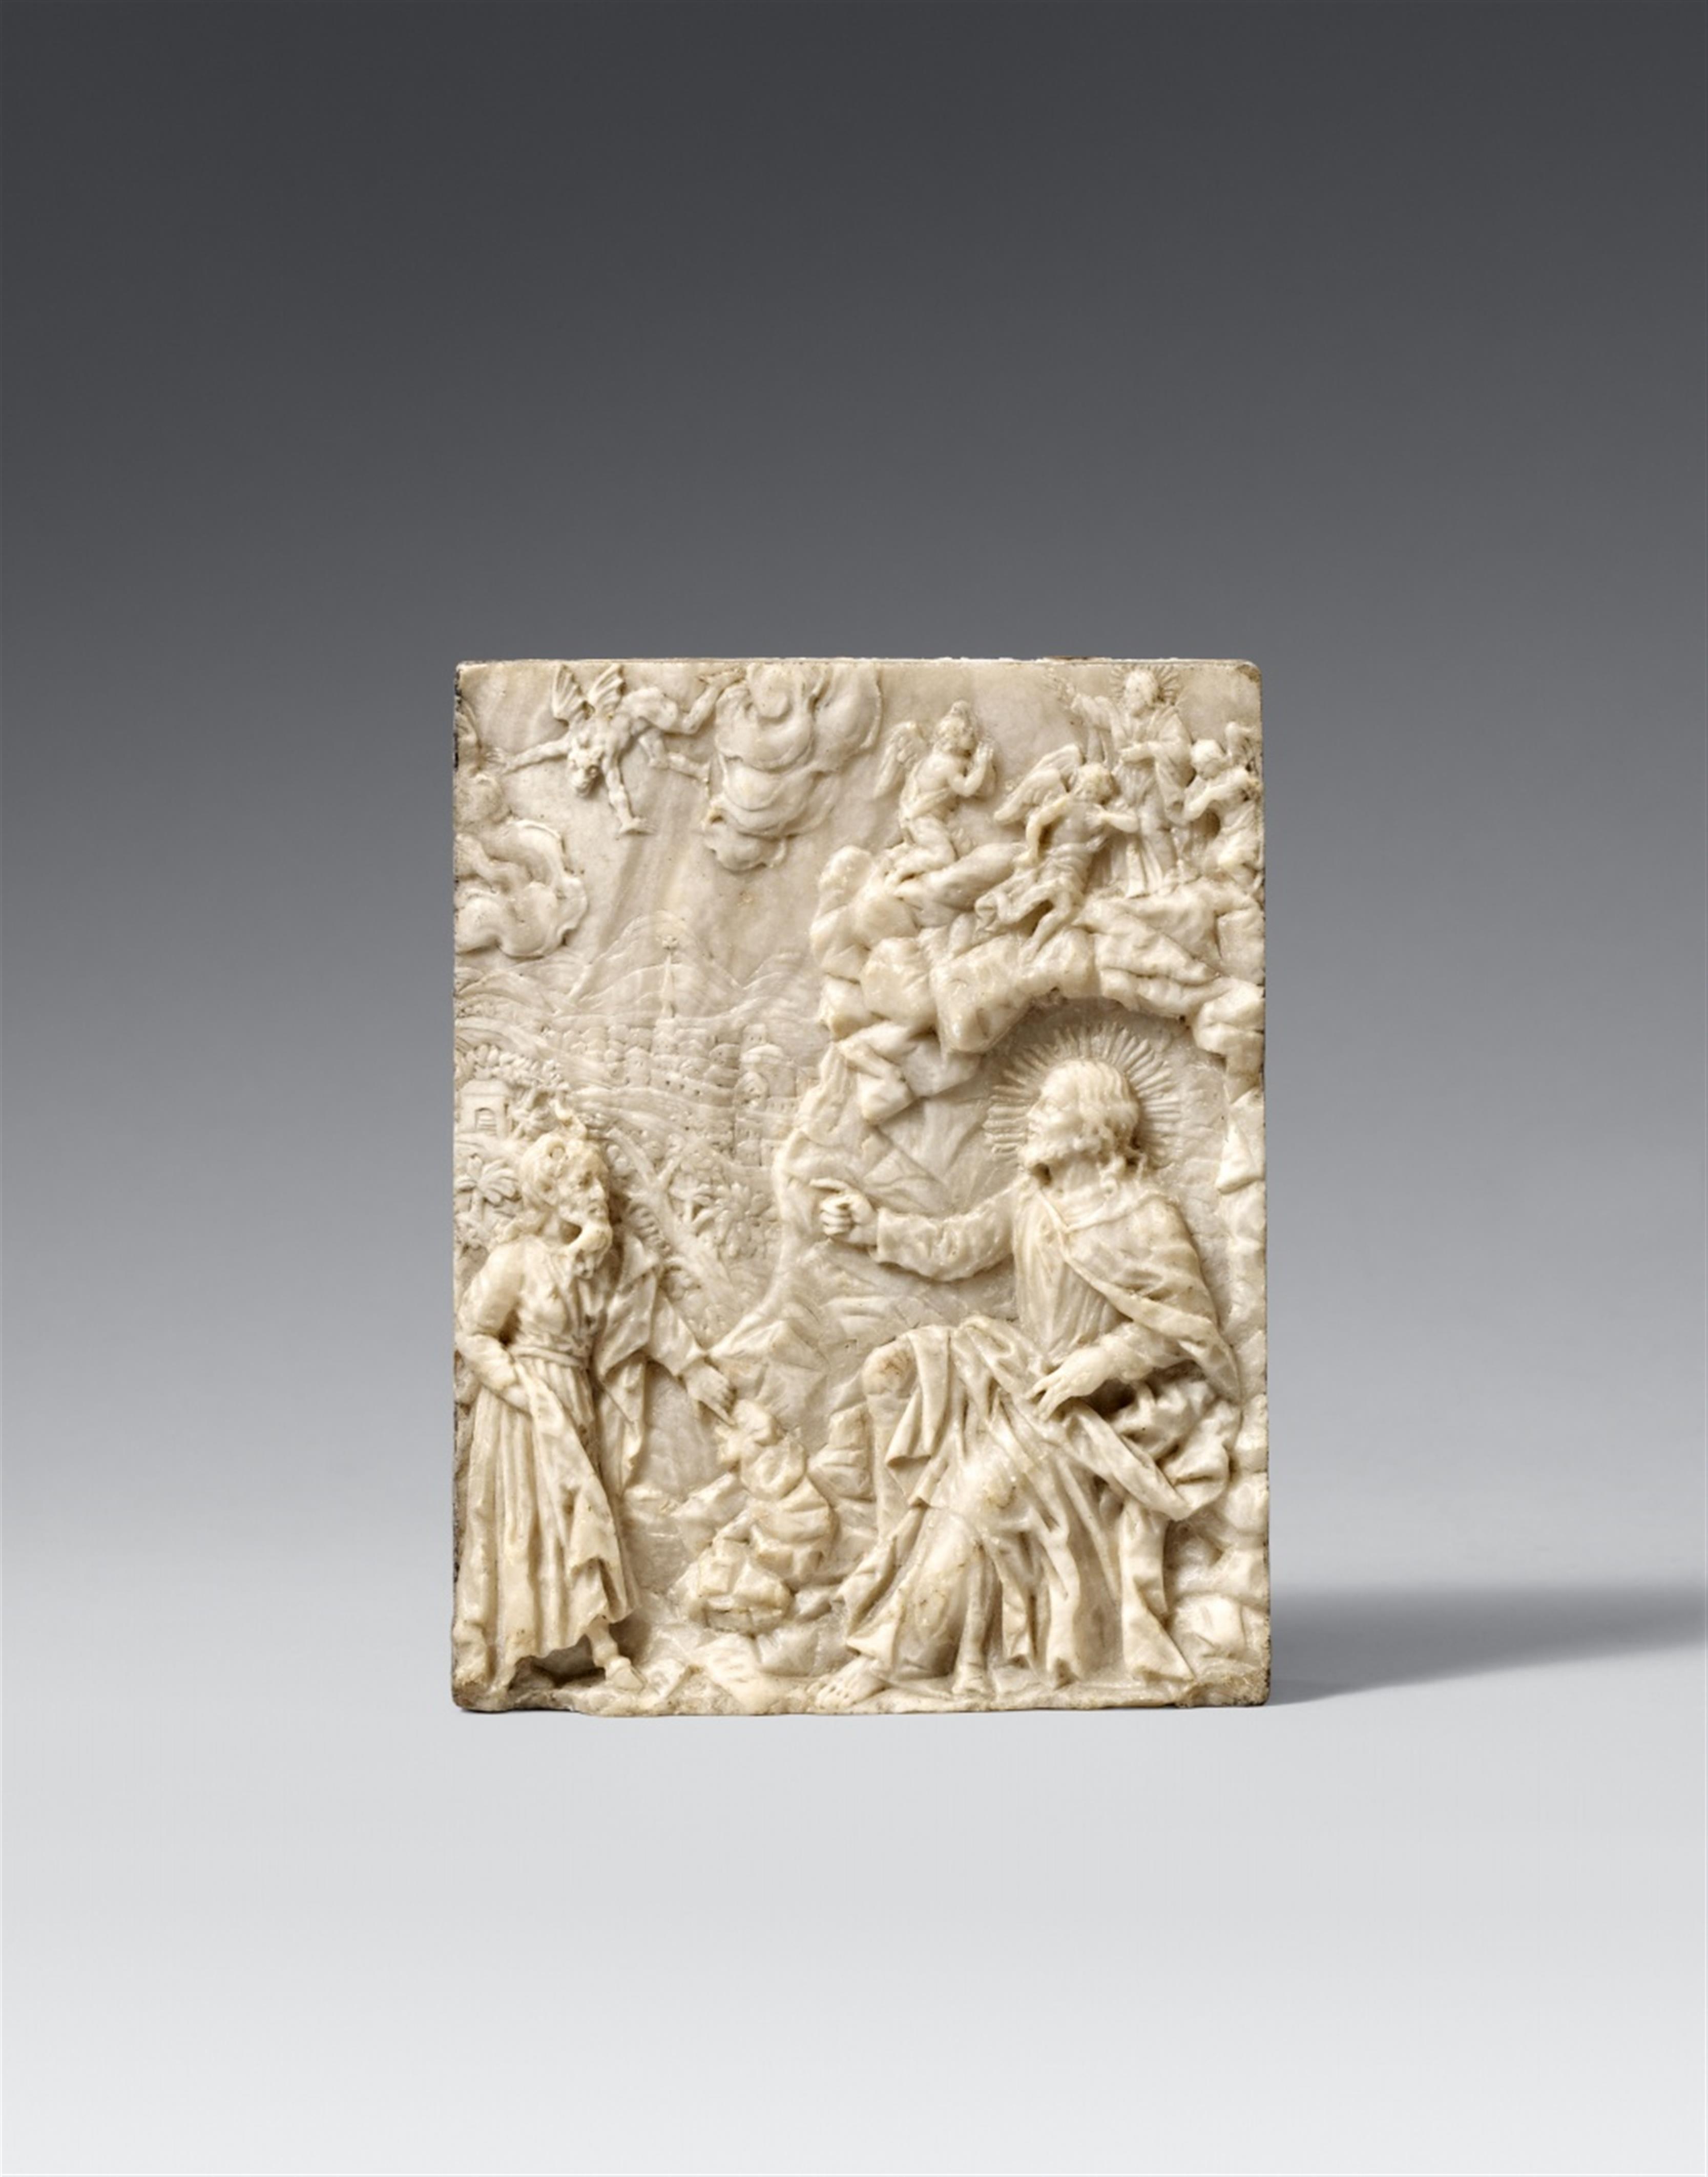 Flemish, 17th century - A 17th century Flemish carved alabaster relief of the Temptation of Christ - image-1